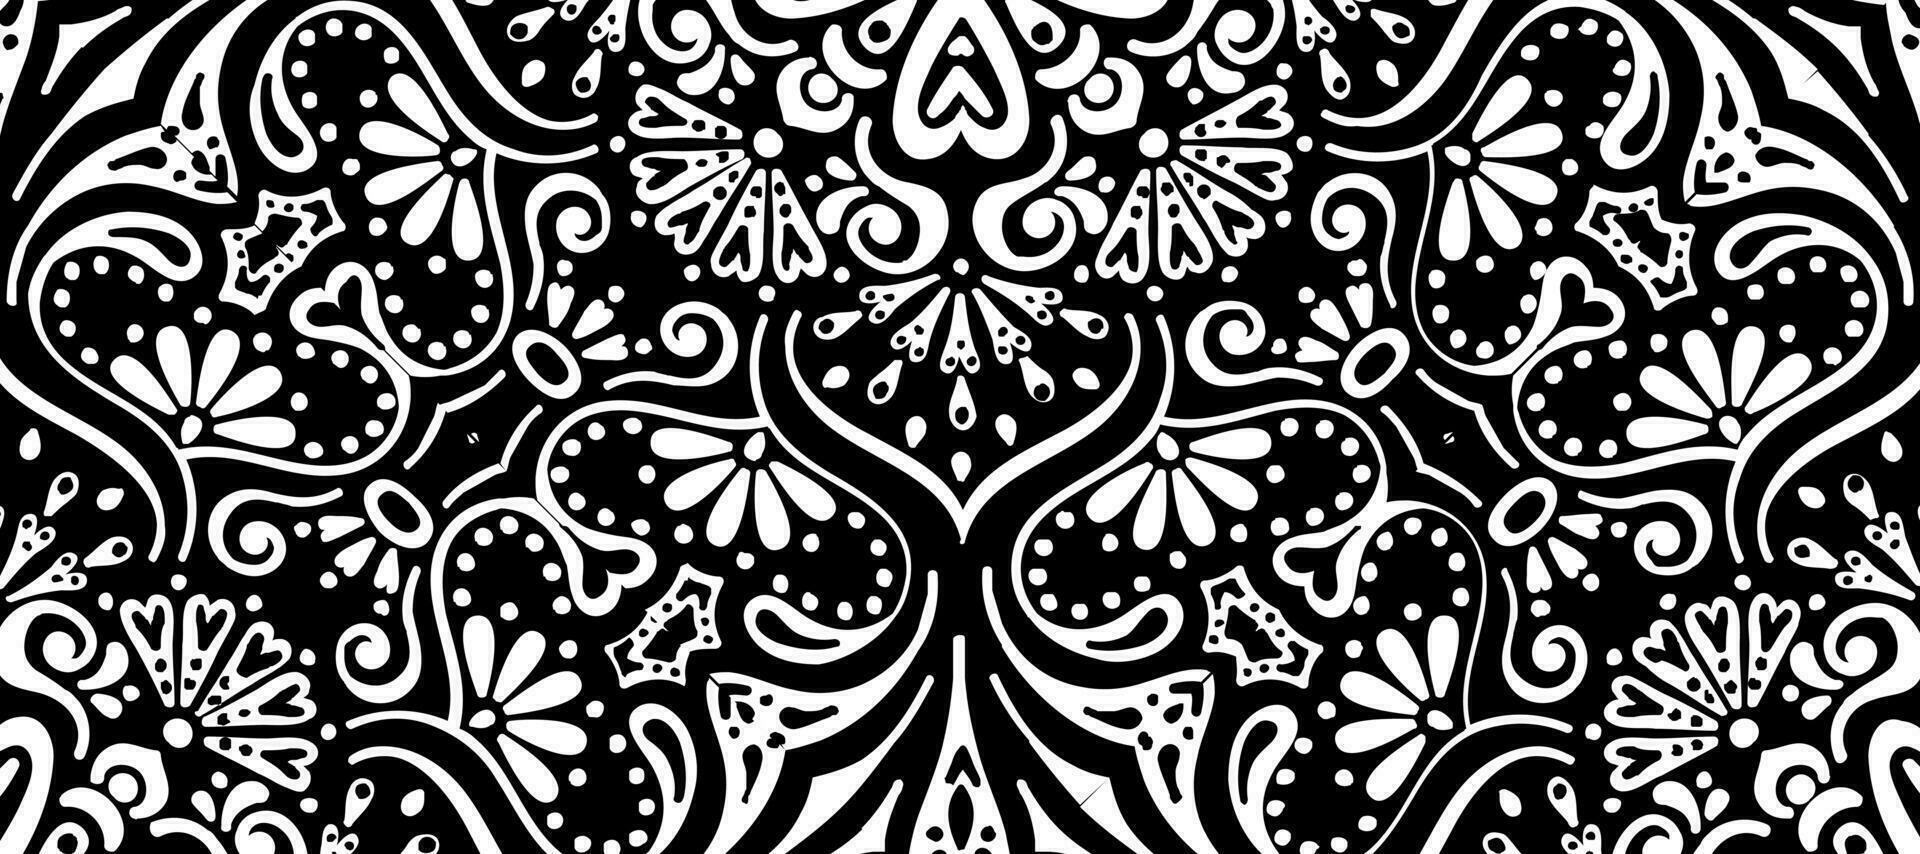 Abstract Paisleys Decorative Pattern black background Wallpaper vector